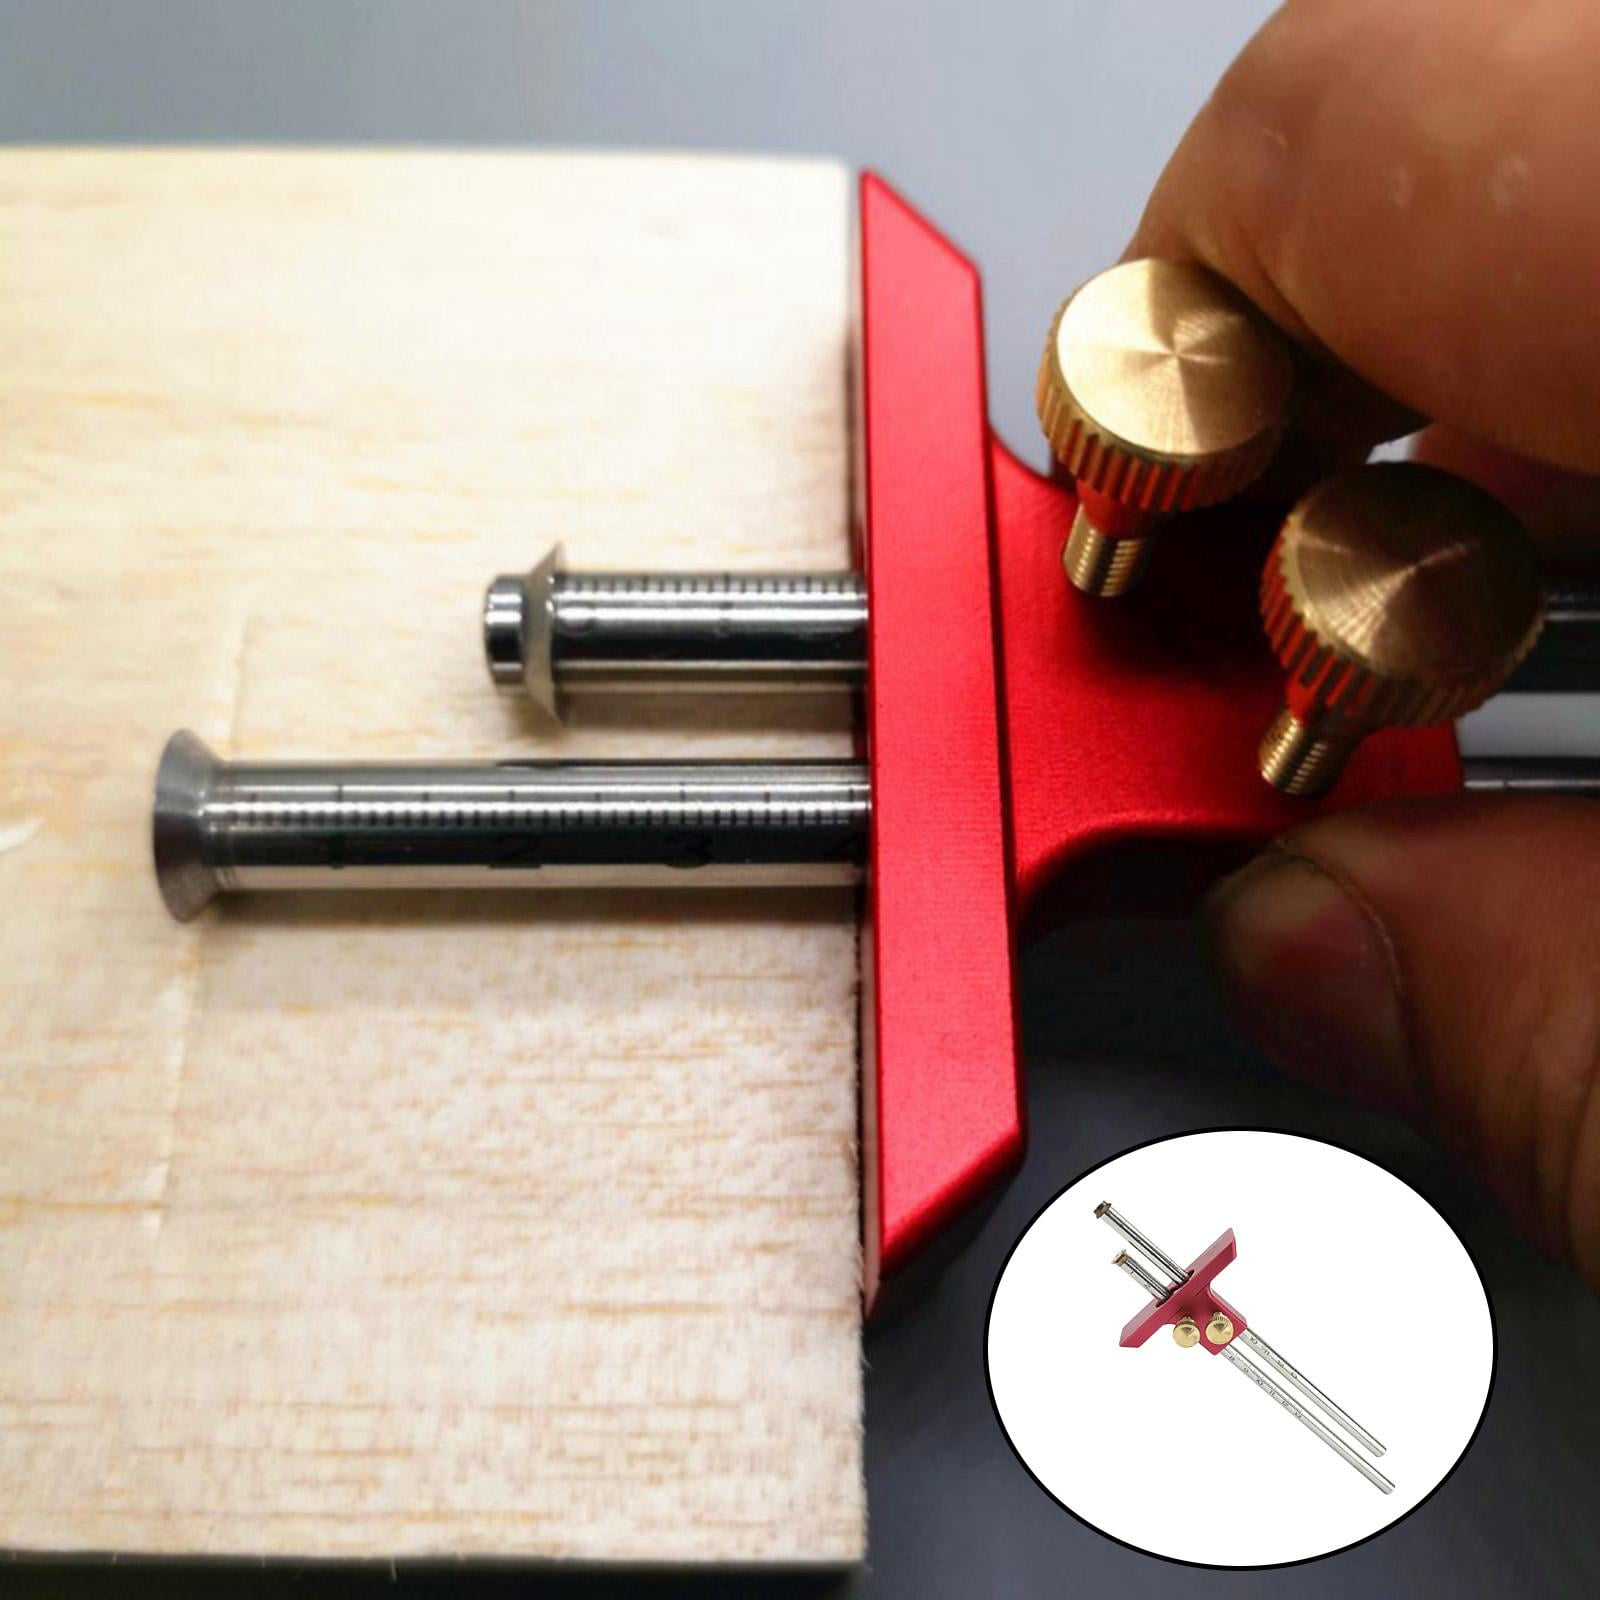 Wholesale Adjustable Aluminum Alloy Woodworking Gauge With DIY Wood Scribing  Keyword Tool From Dejx, $57.47